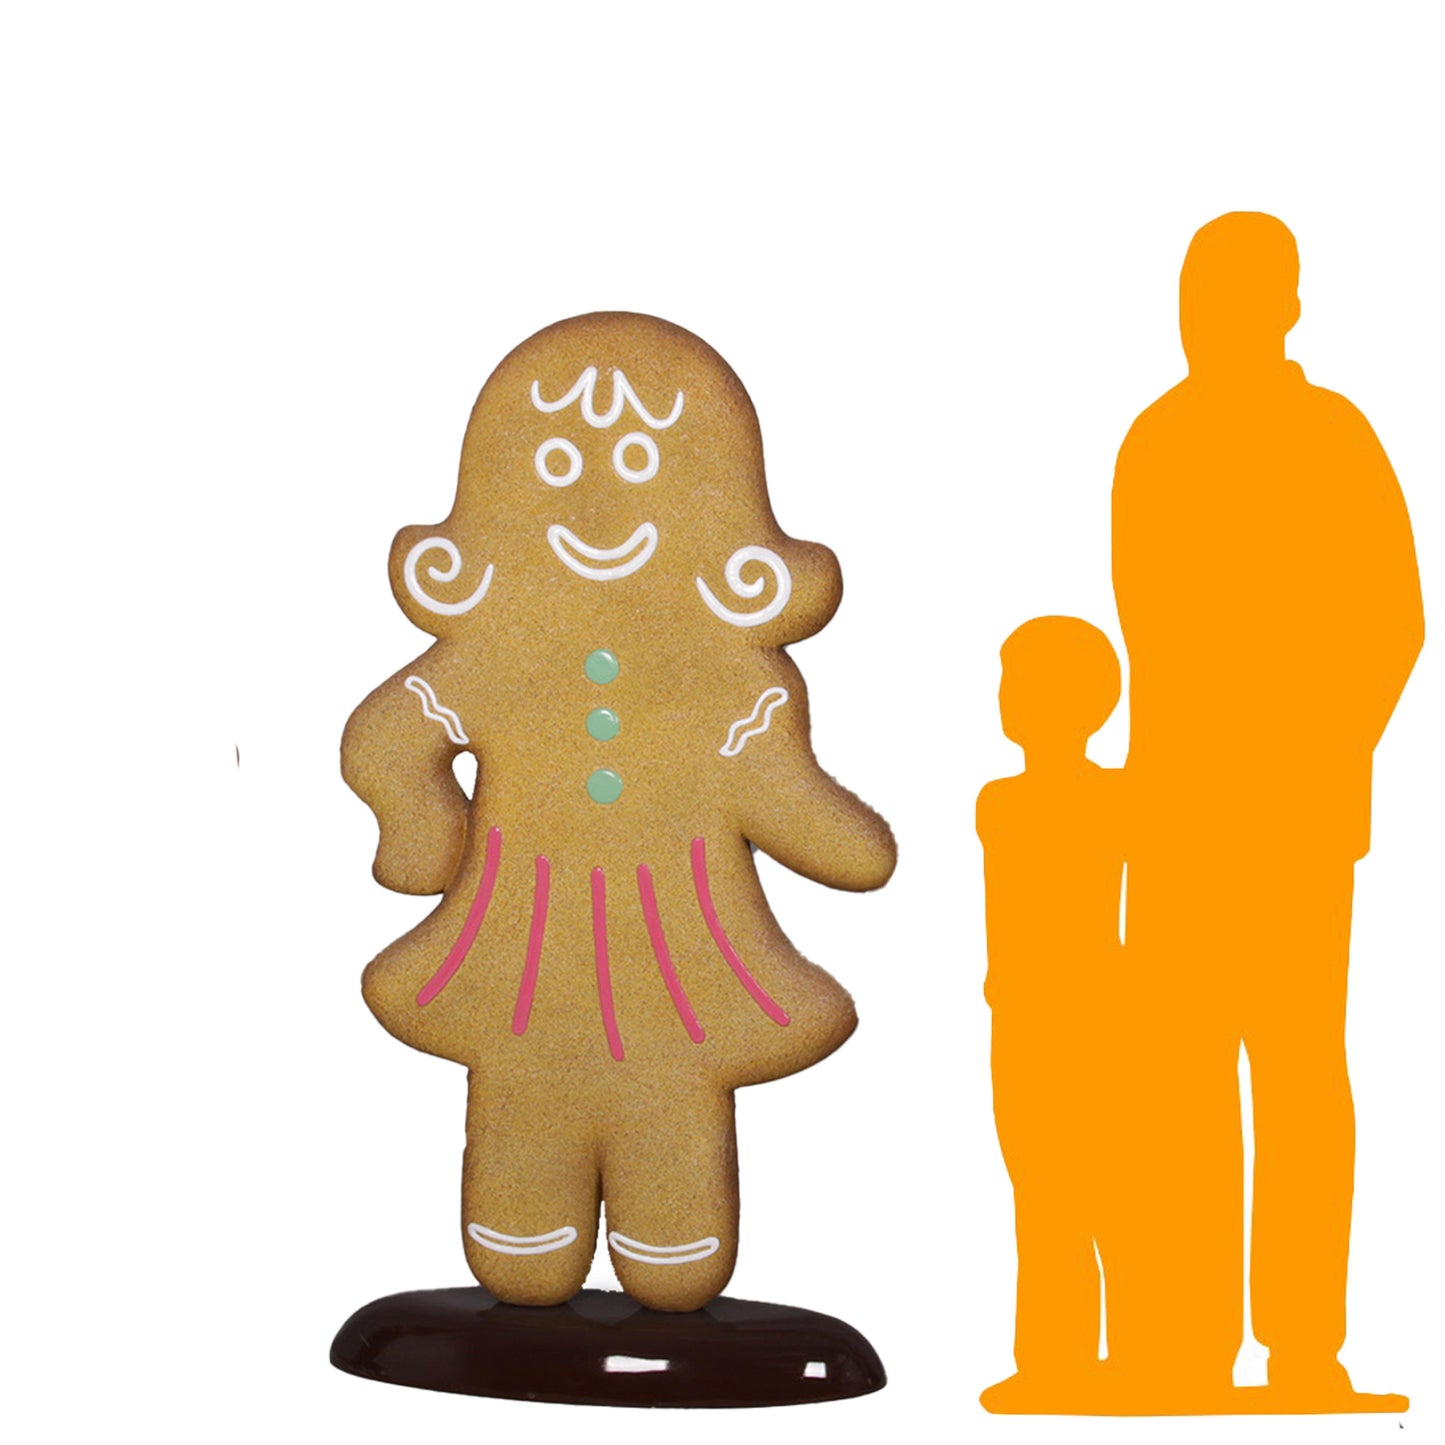 Woman Gingerbread Cookie Statue